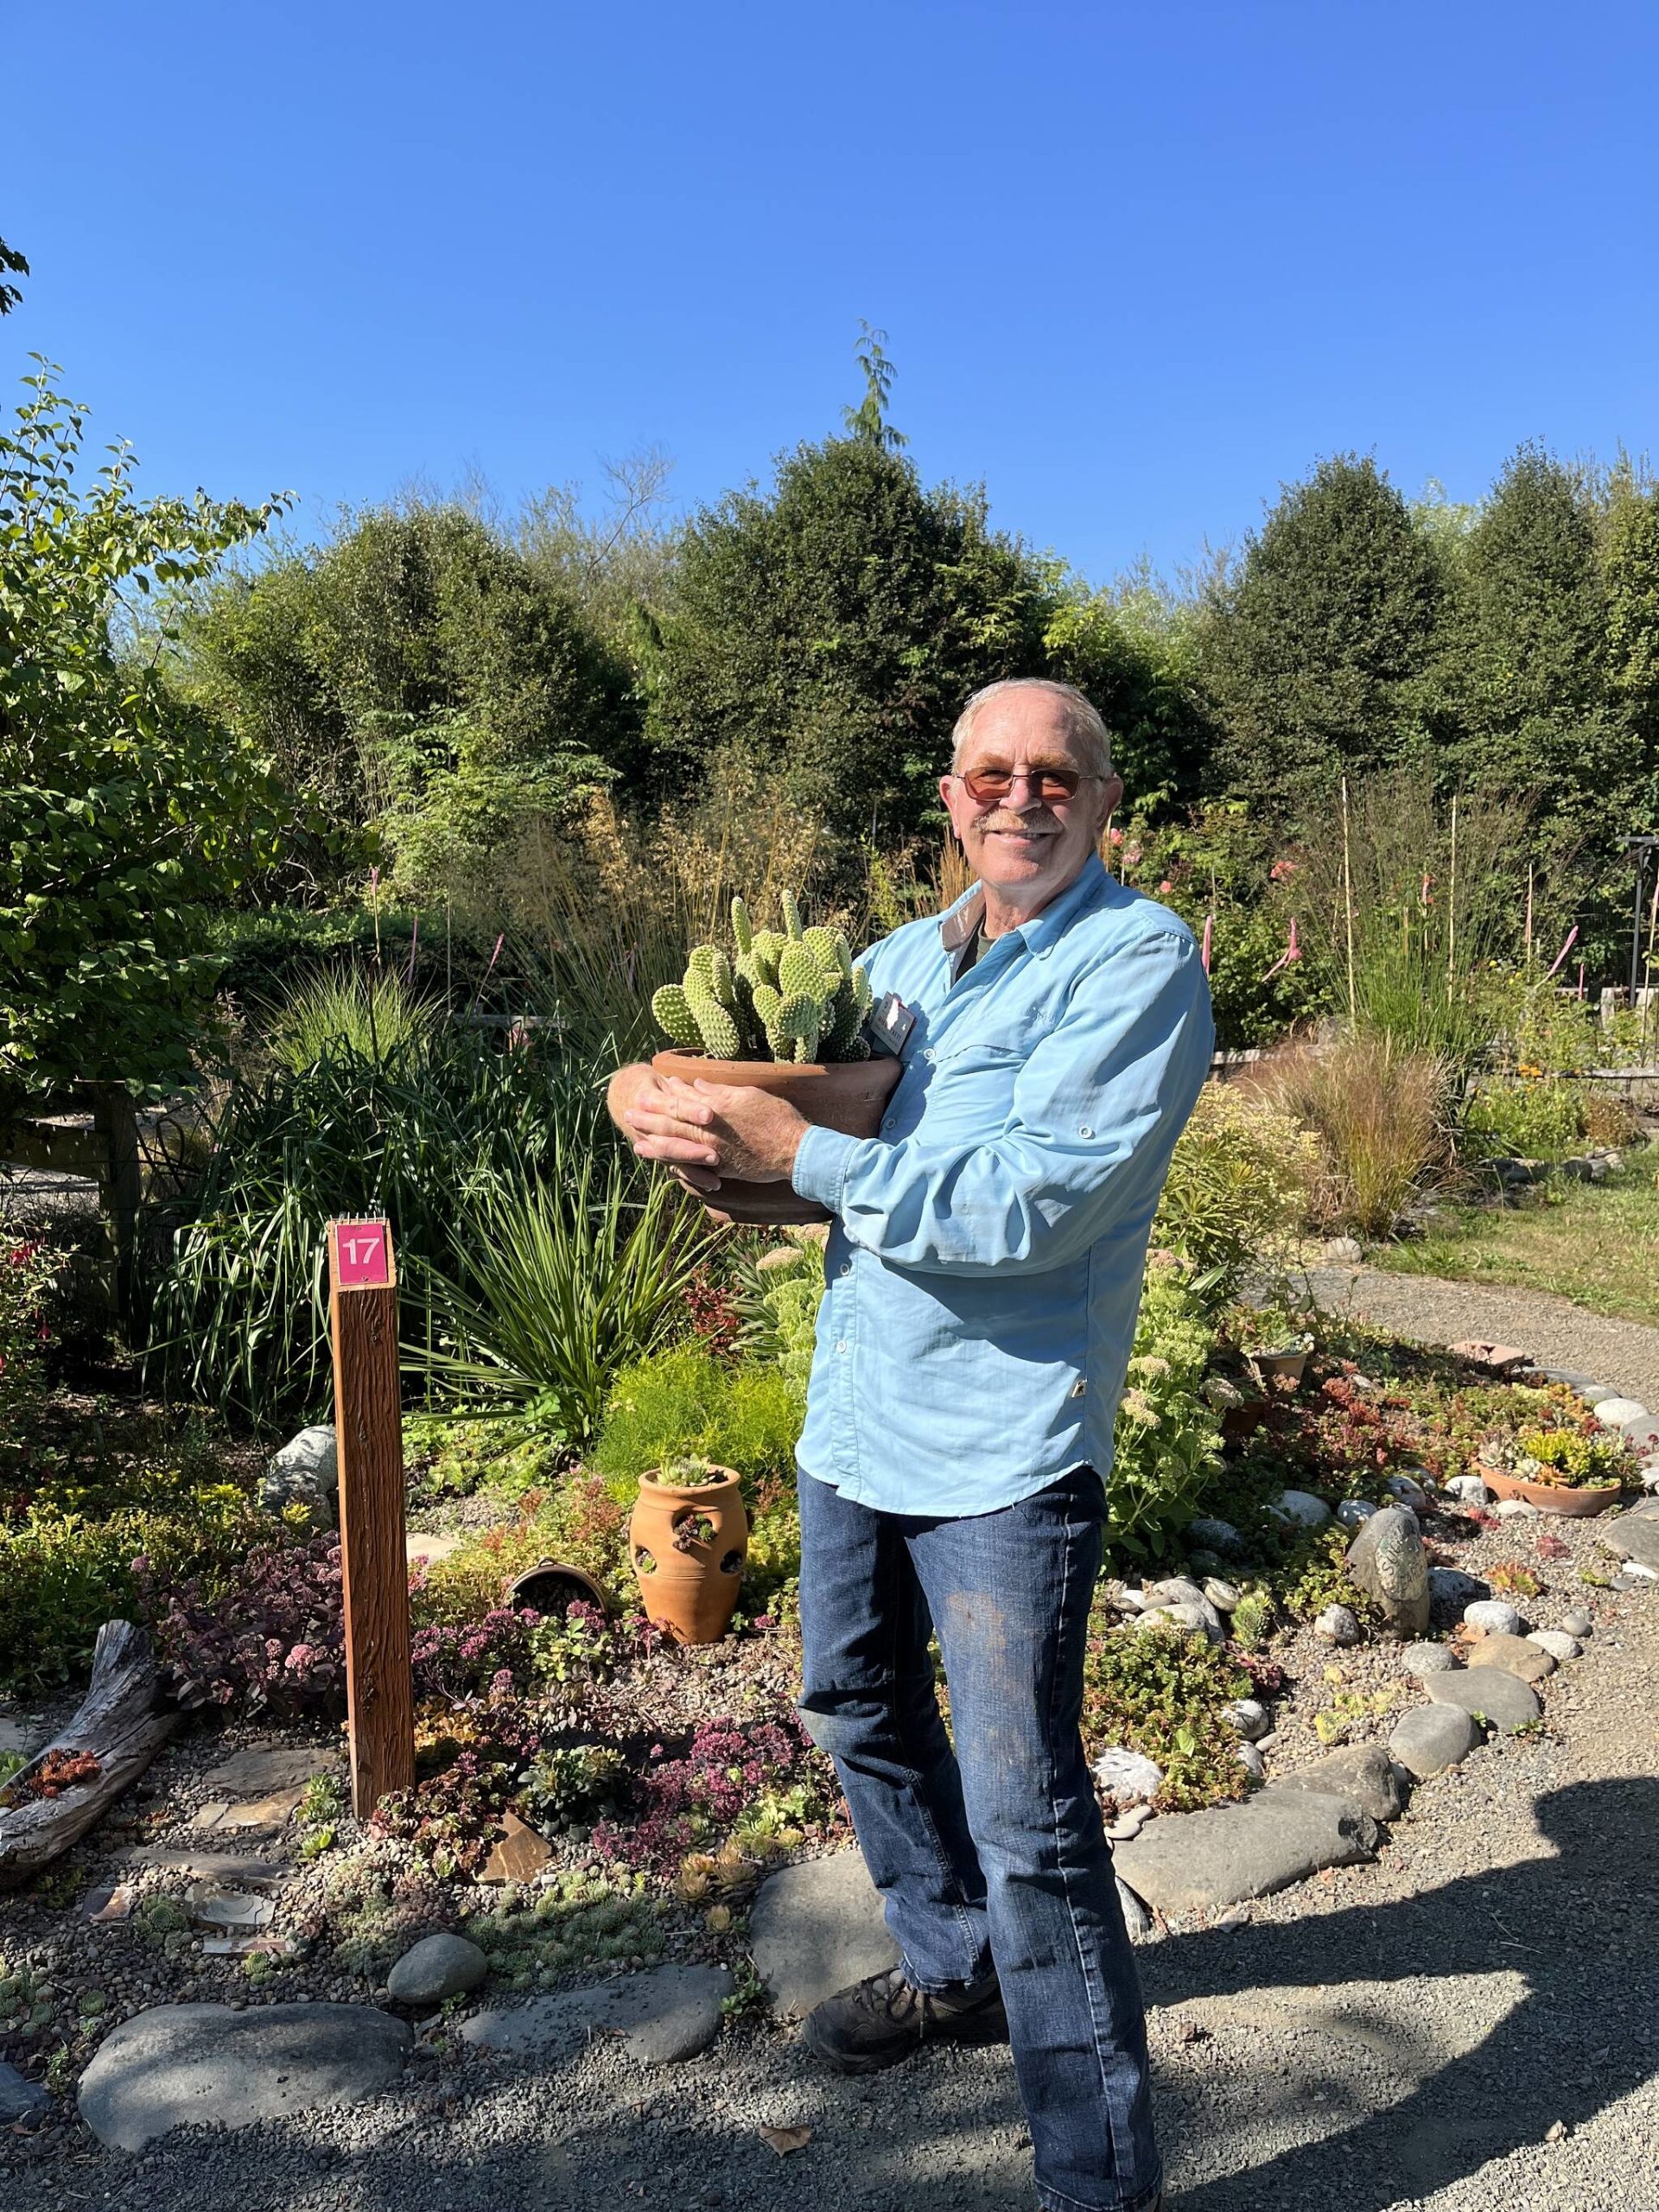 Find out how easy, beautiful and versatile gardening with succulents can be. Join Clallam County Master Gardener Bob Blackett Thursday, Sept. 8 from noon – 1 p.m. for a Green Thumb Garden Tips Zoom presentation on gardening successfully with succulents. hoto by Susan Kalmar